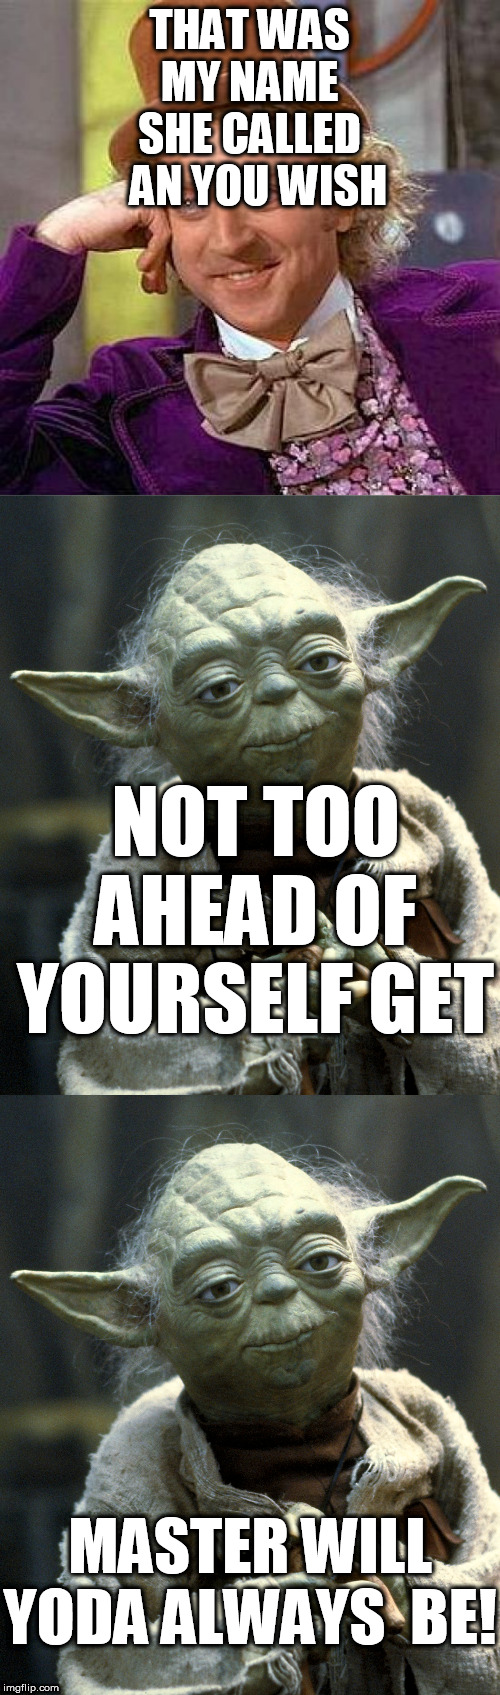 YODA the SHOW  IS RUNNING! | THAT WAS MY NAME SHE CALLED   AN YOU WISH; NOT TOO AHEAD OF YOURSELF GET; MASTER WILL YODA ALWAYS  BE! | image tagged in memes,creepy condescending wonka,star wars yoda,master yoda,she called my name,you wish | made w/ Imgflip meme maker